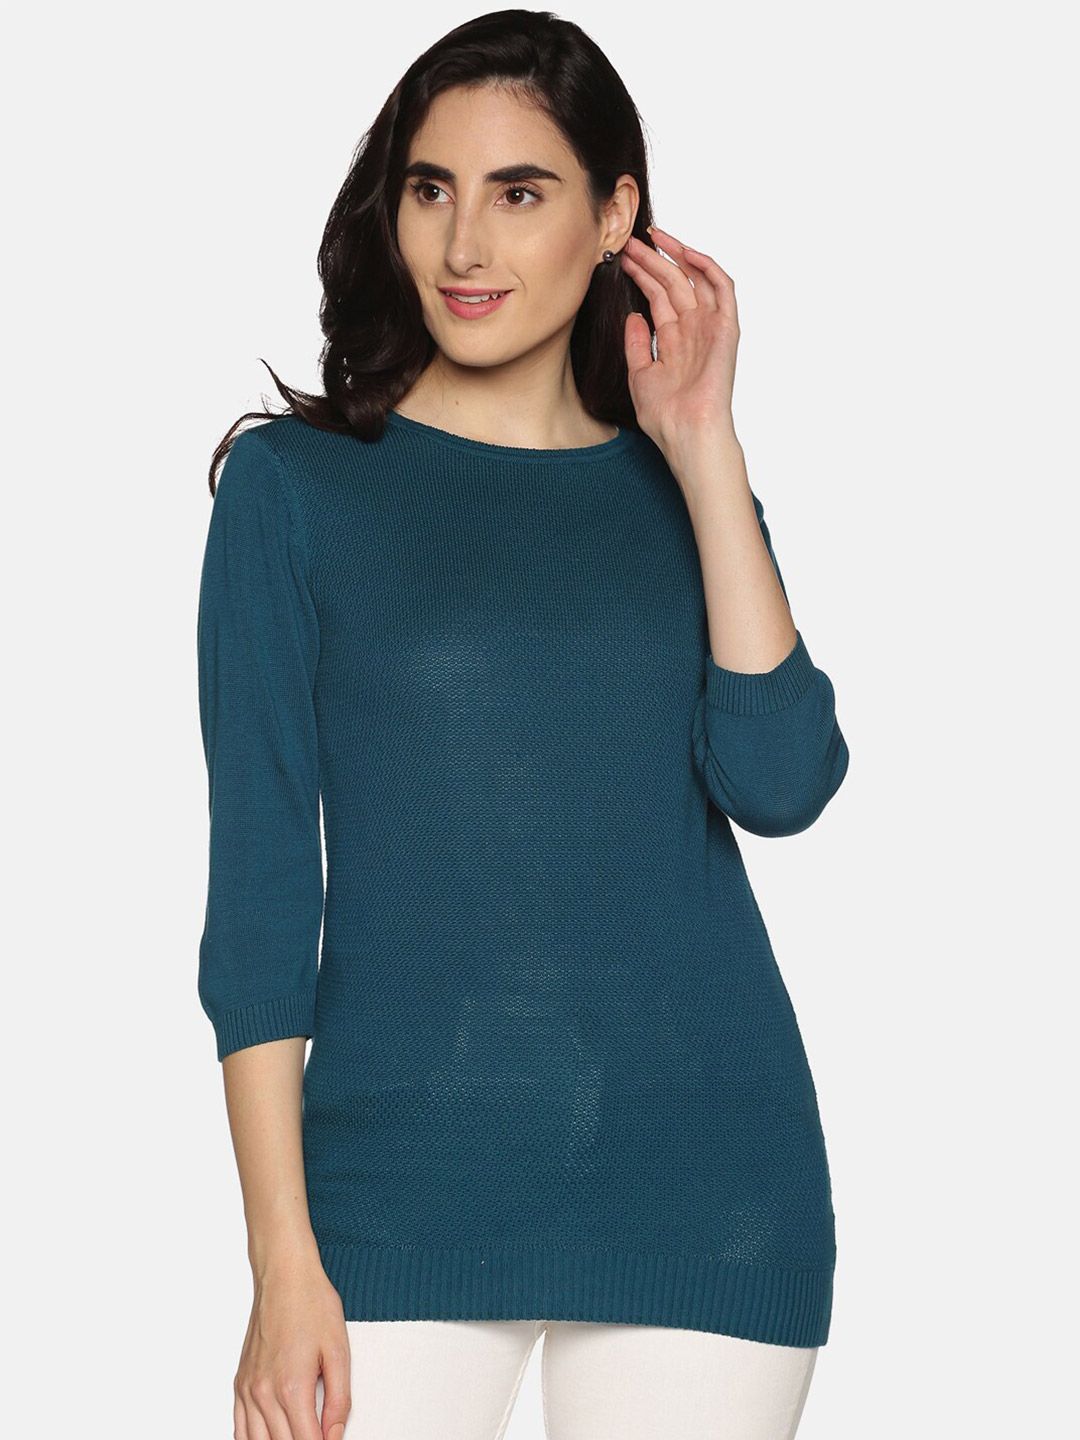 DAiSY Women Teal Blue Regular Fit Pullover Price in India